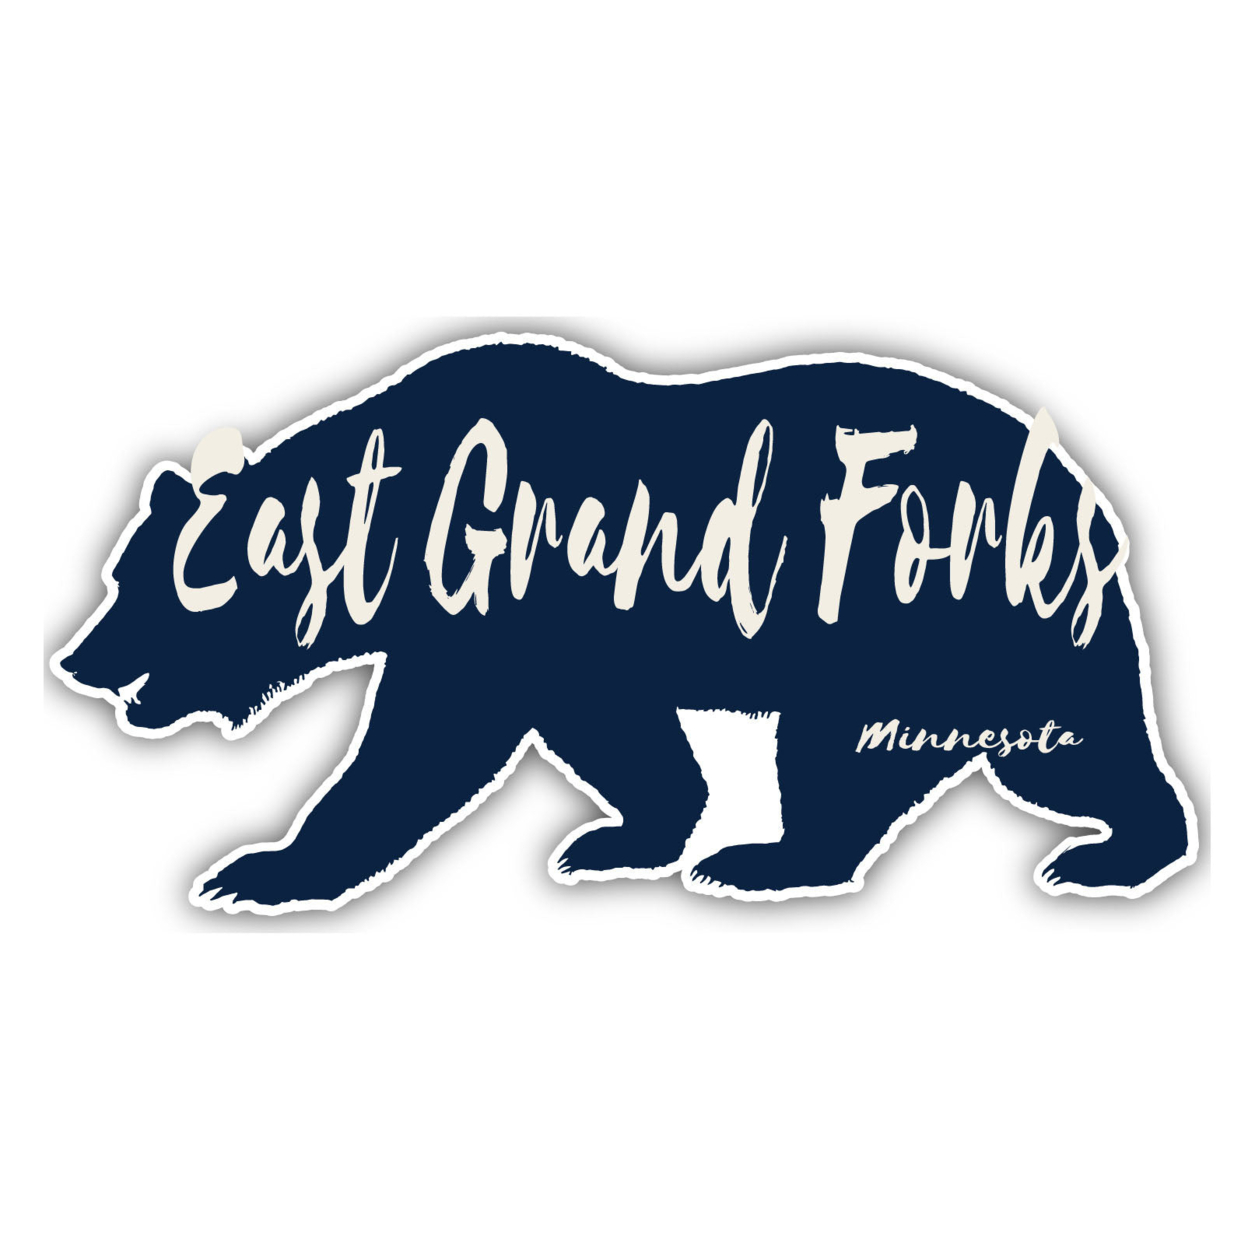 East Grand Forks Minnesota Souvenir Decorative Stickers (Choose Theme And Size) - Single Unit, 6-Inch, Tent